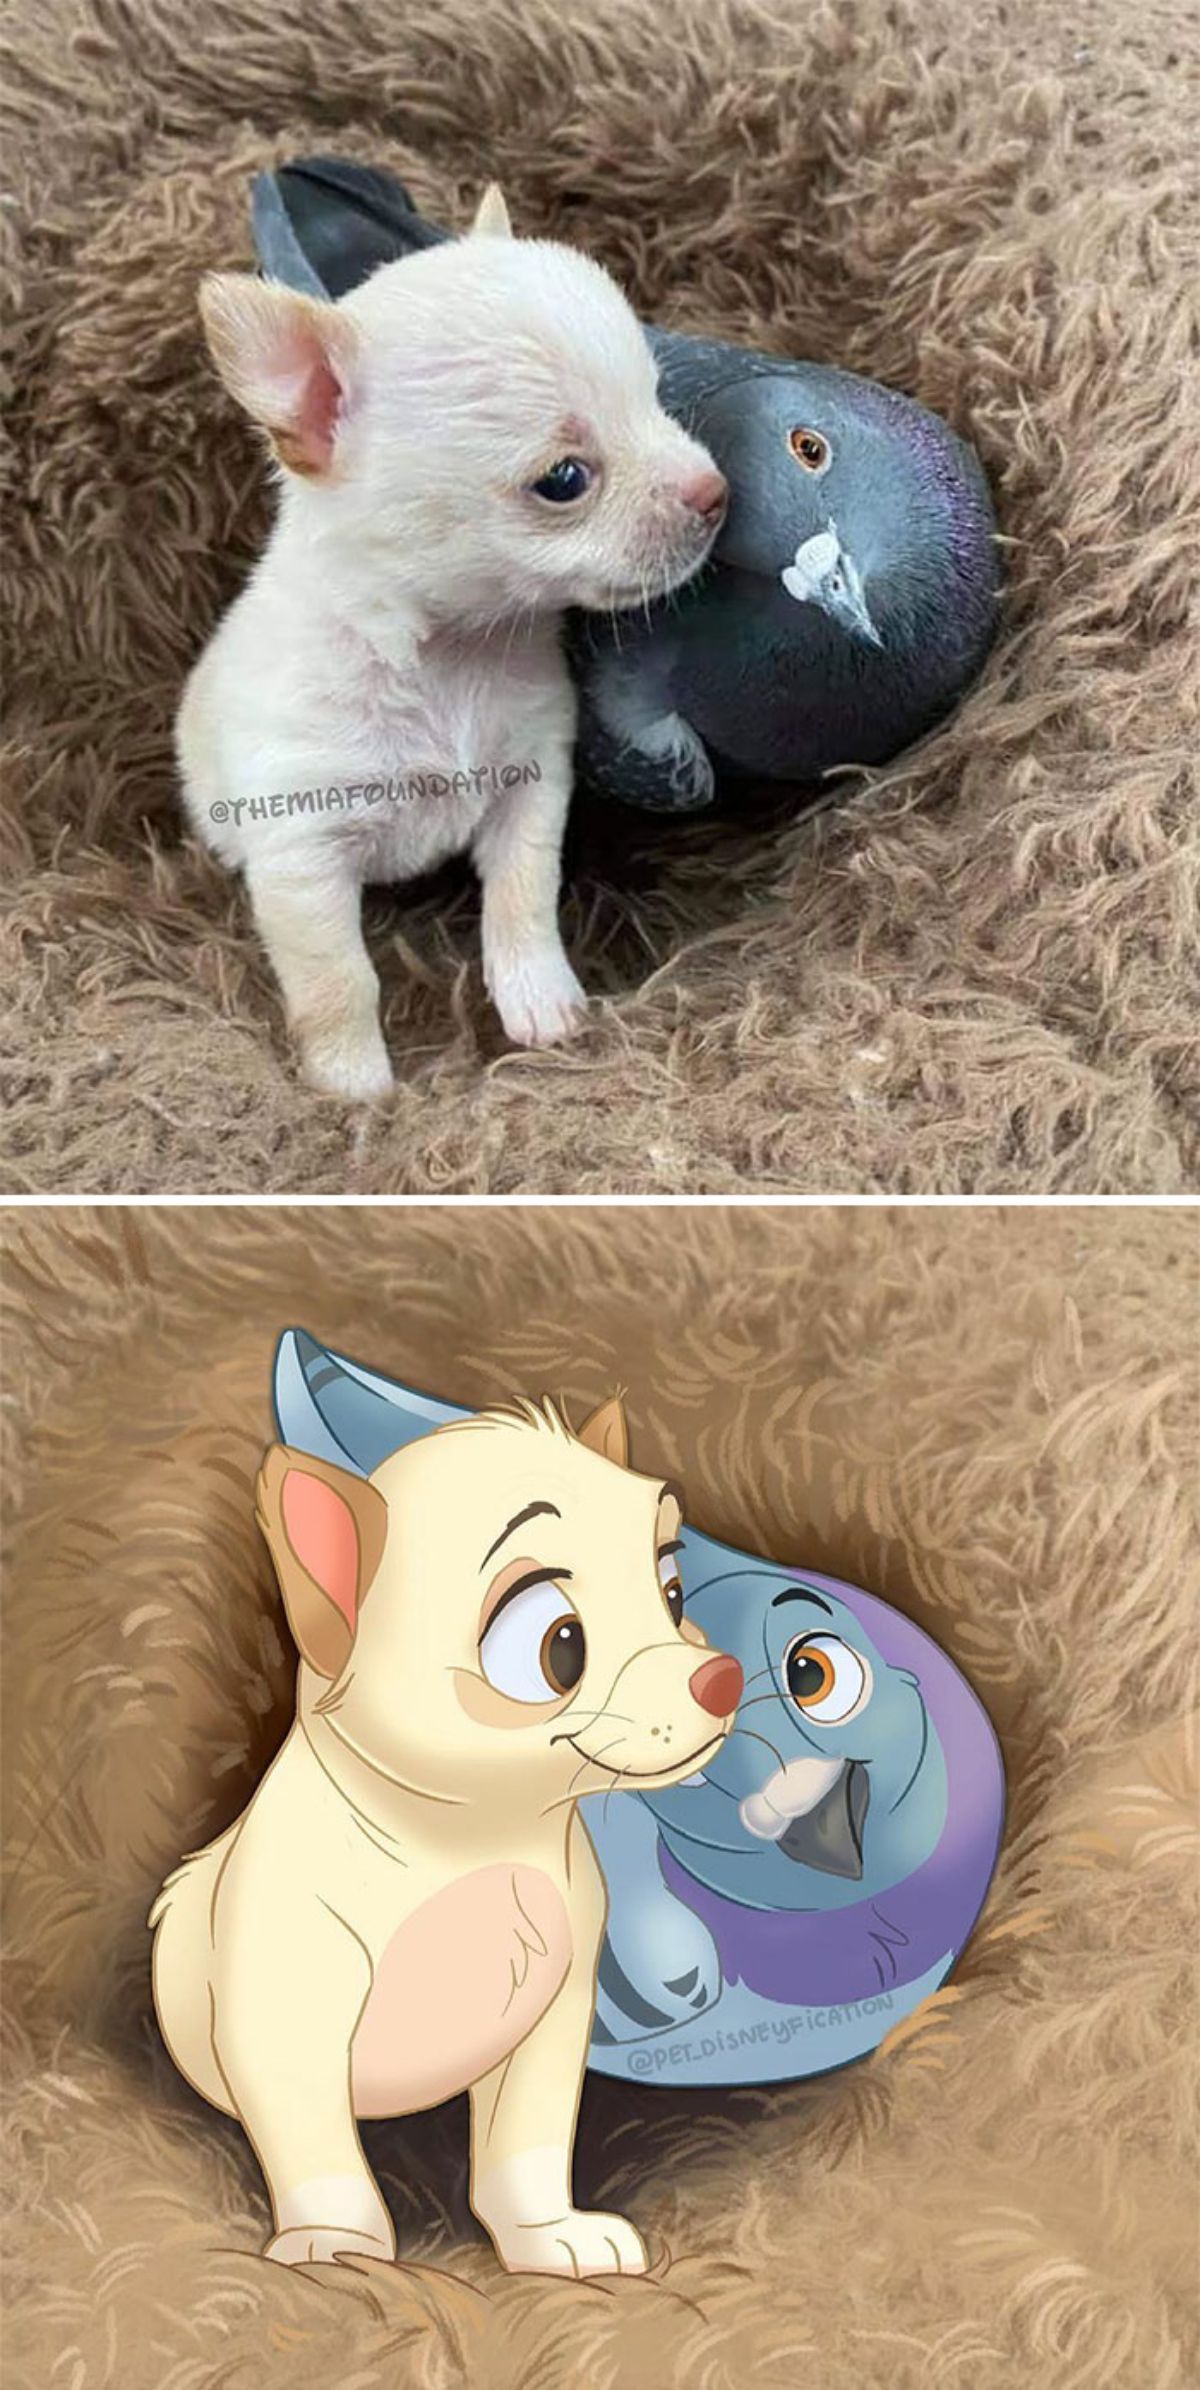 real photo and cartoon image of a white puppy cuddling with a grey pigeon